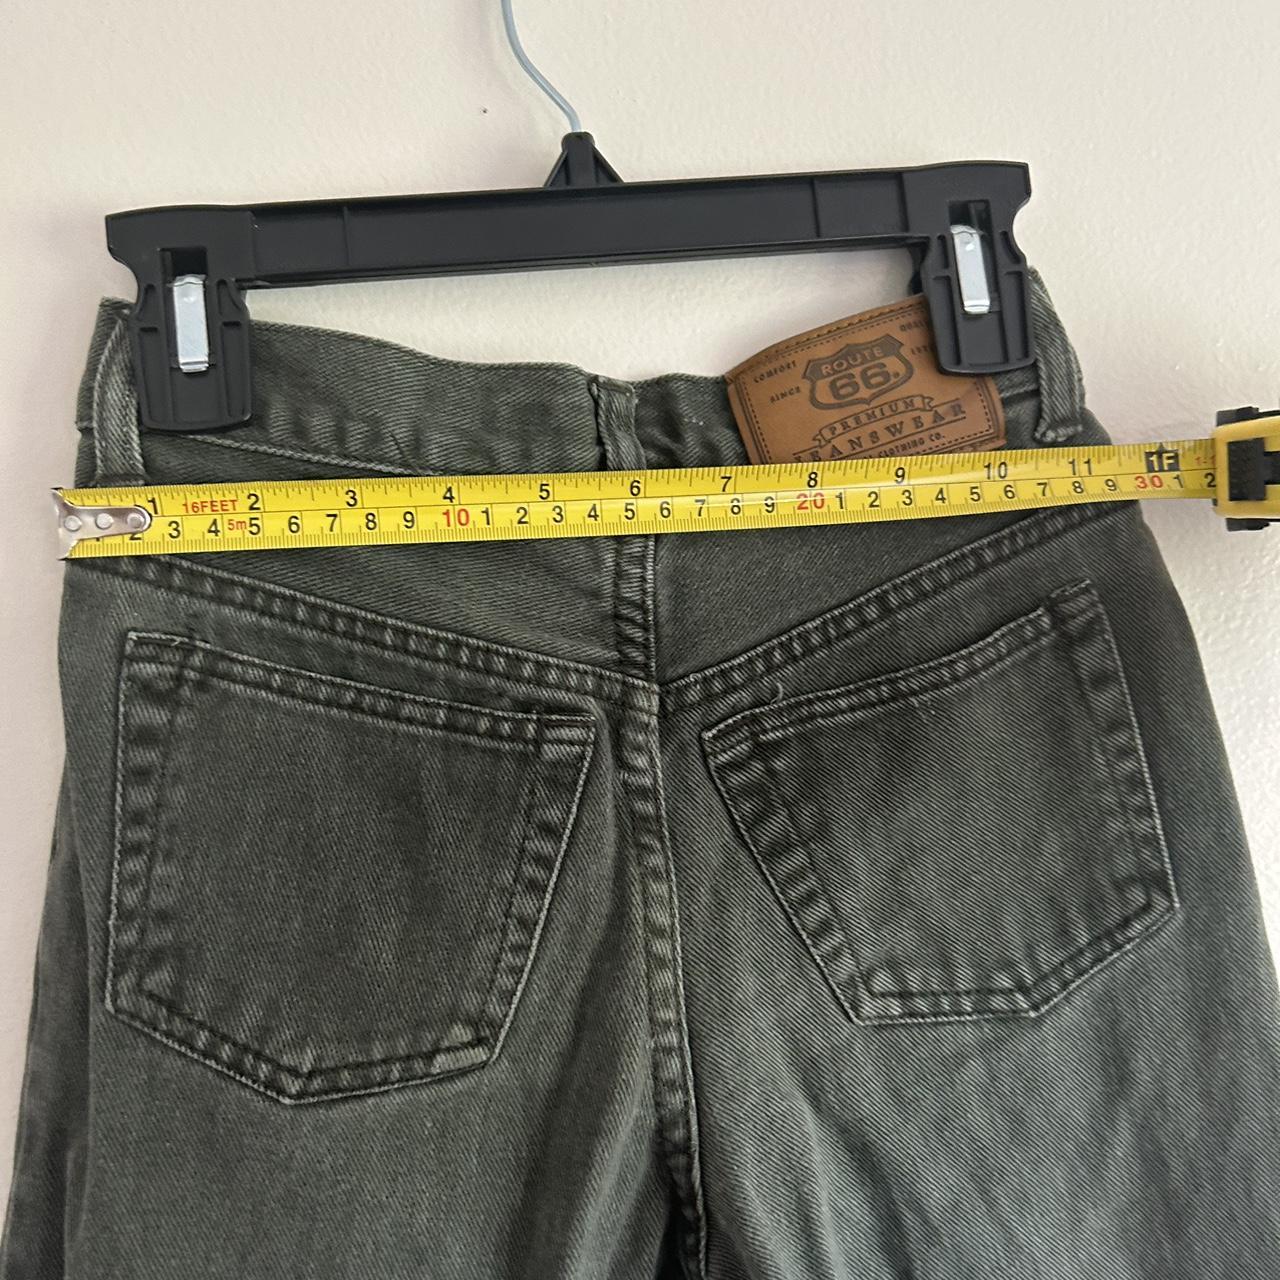 Route 66 Relaxed Fit Denim Jeans FREE... - Depop